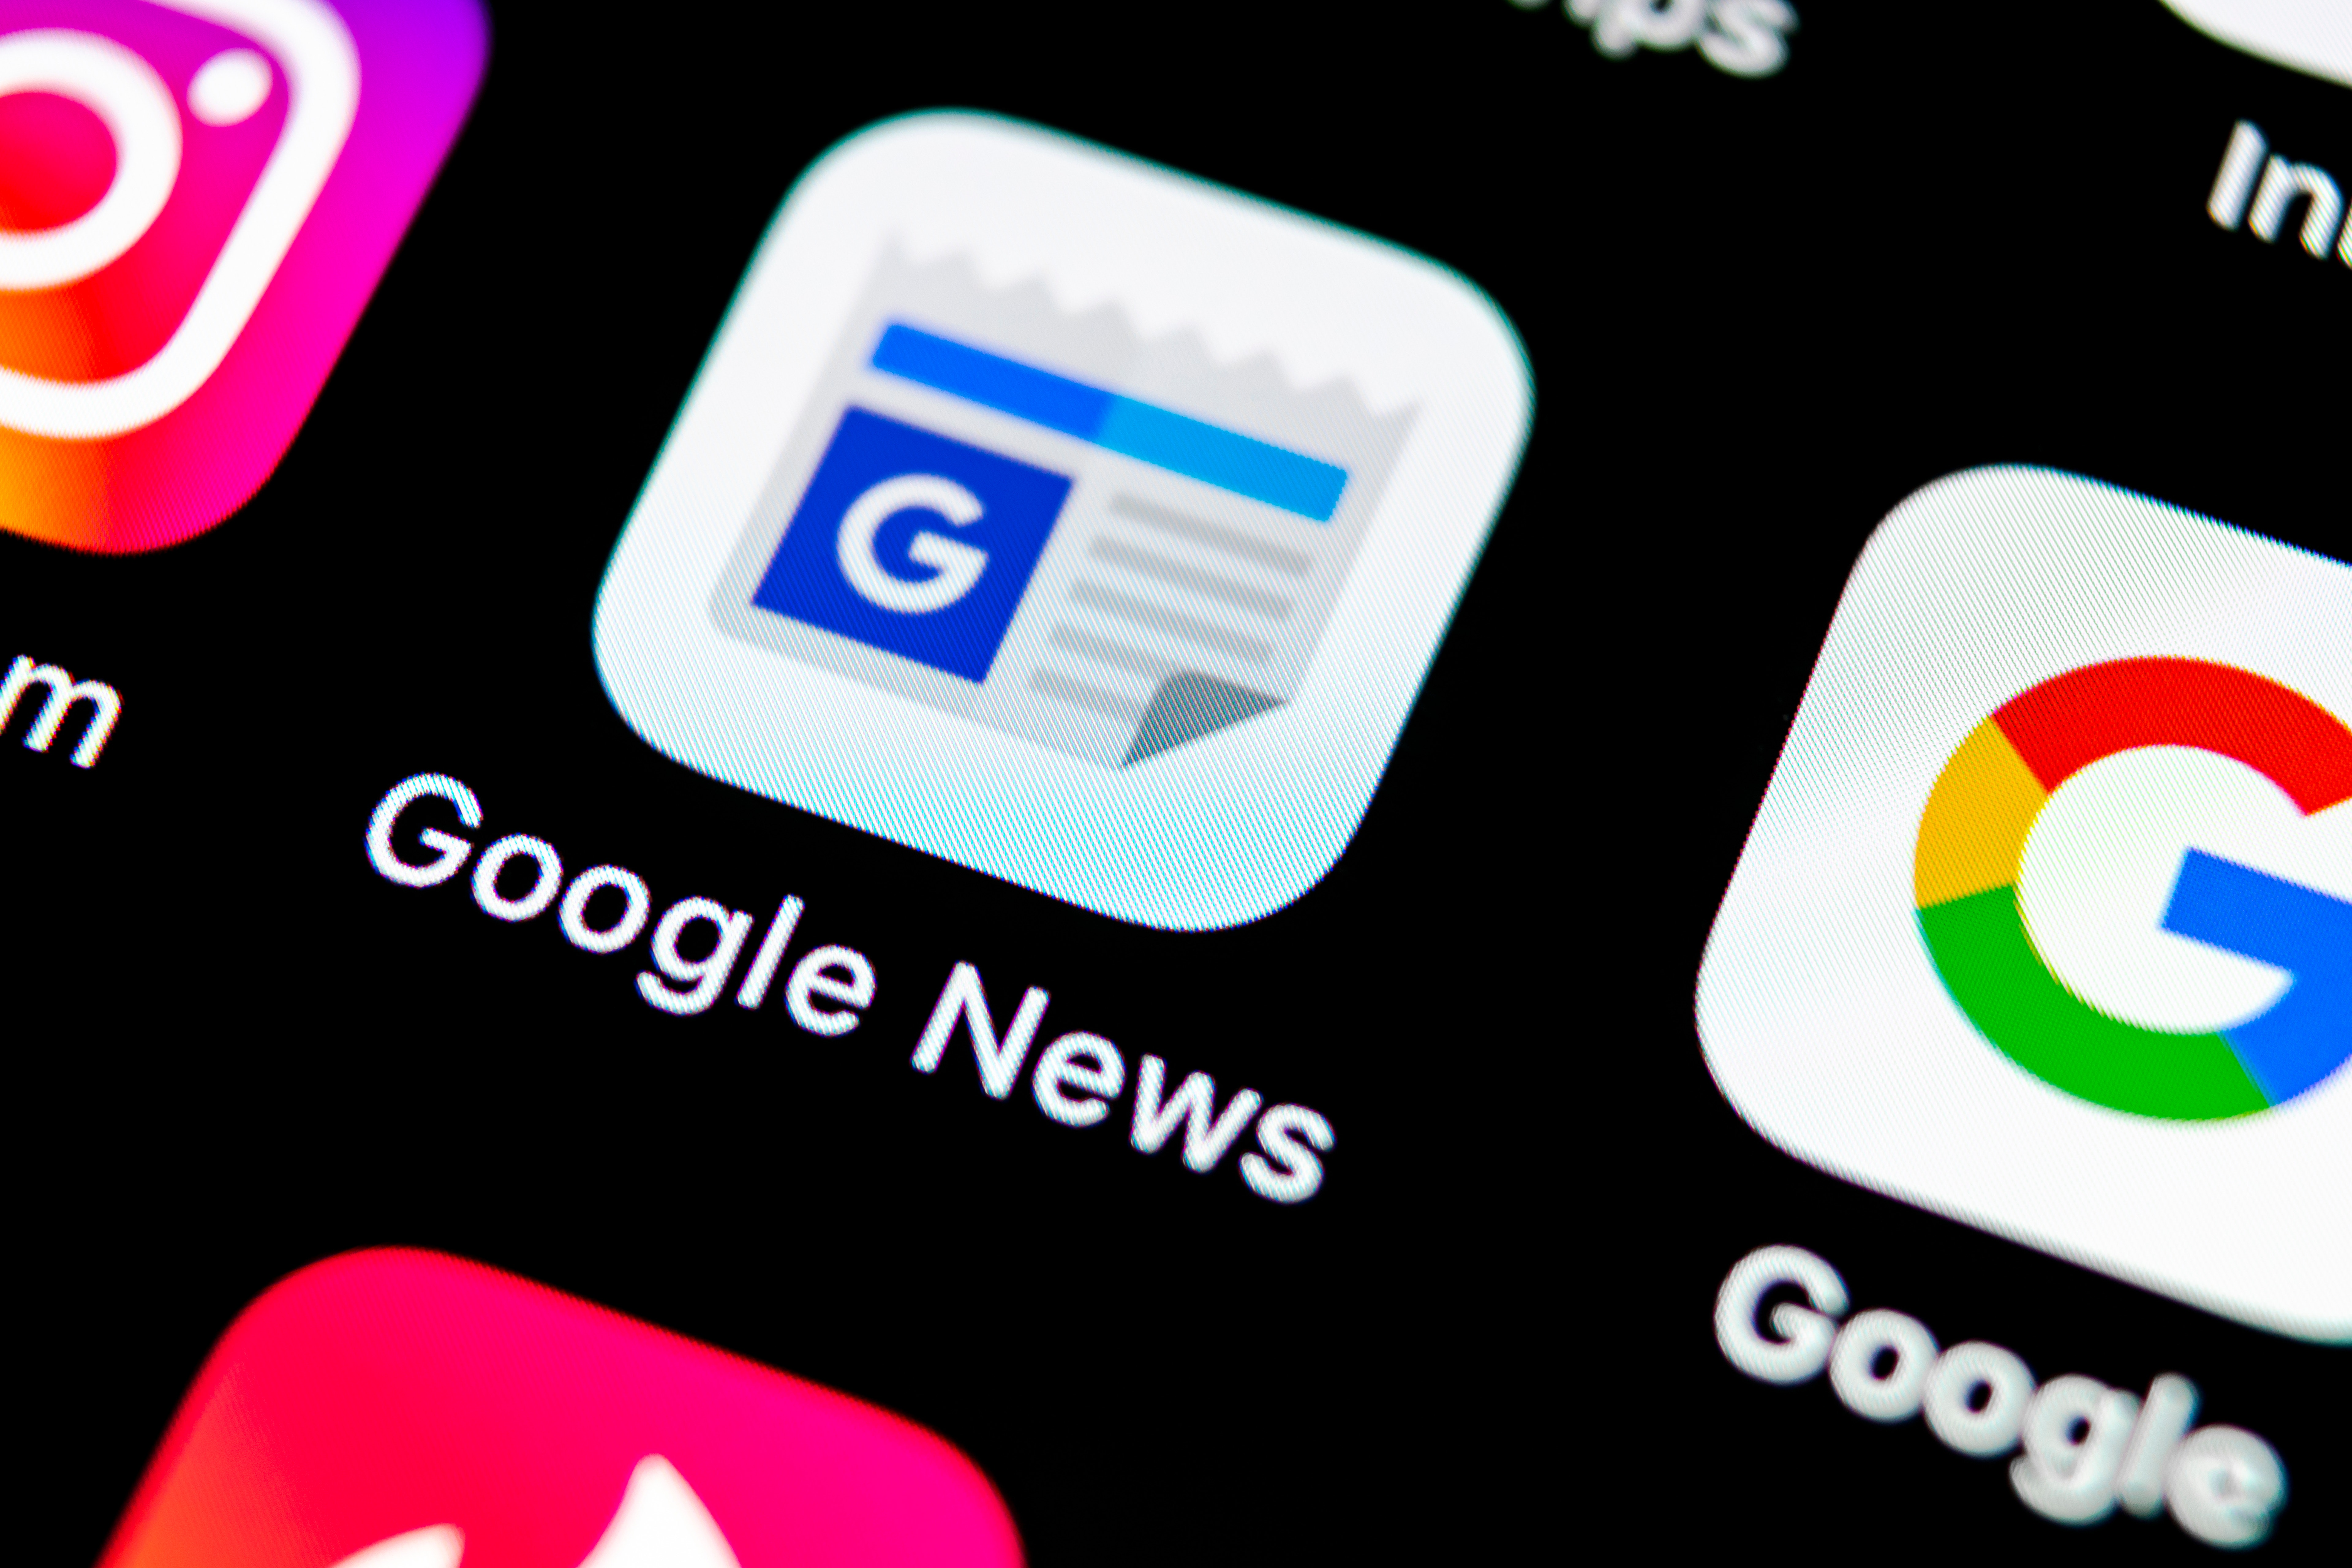 Google News Resumes Services In Spain After 8-Year Hiatus: Here&#39;s What Happened